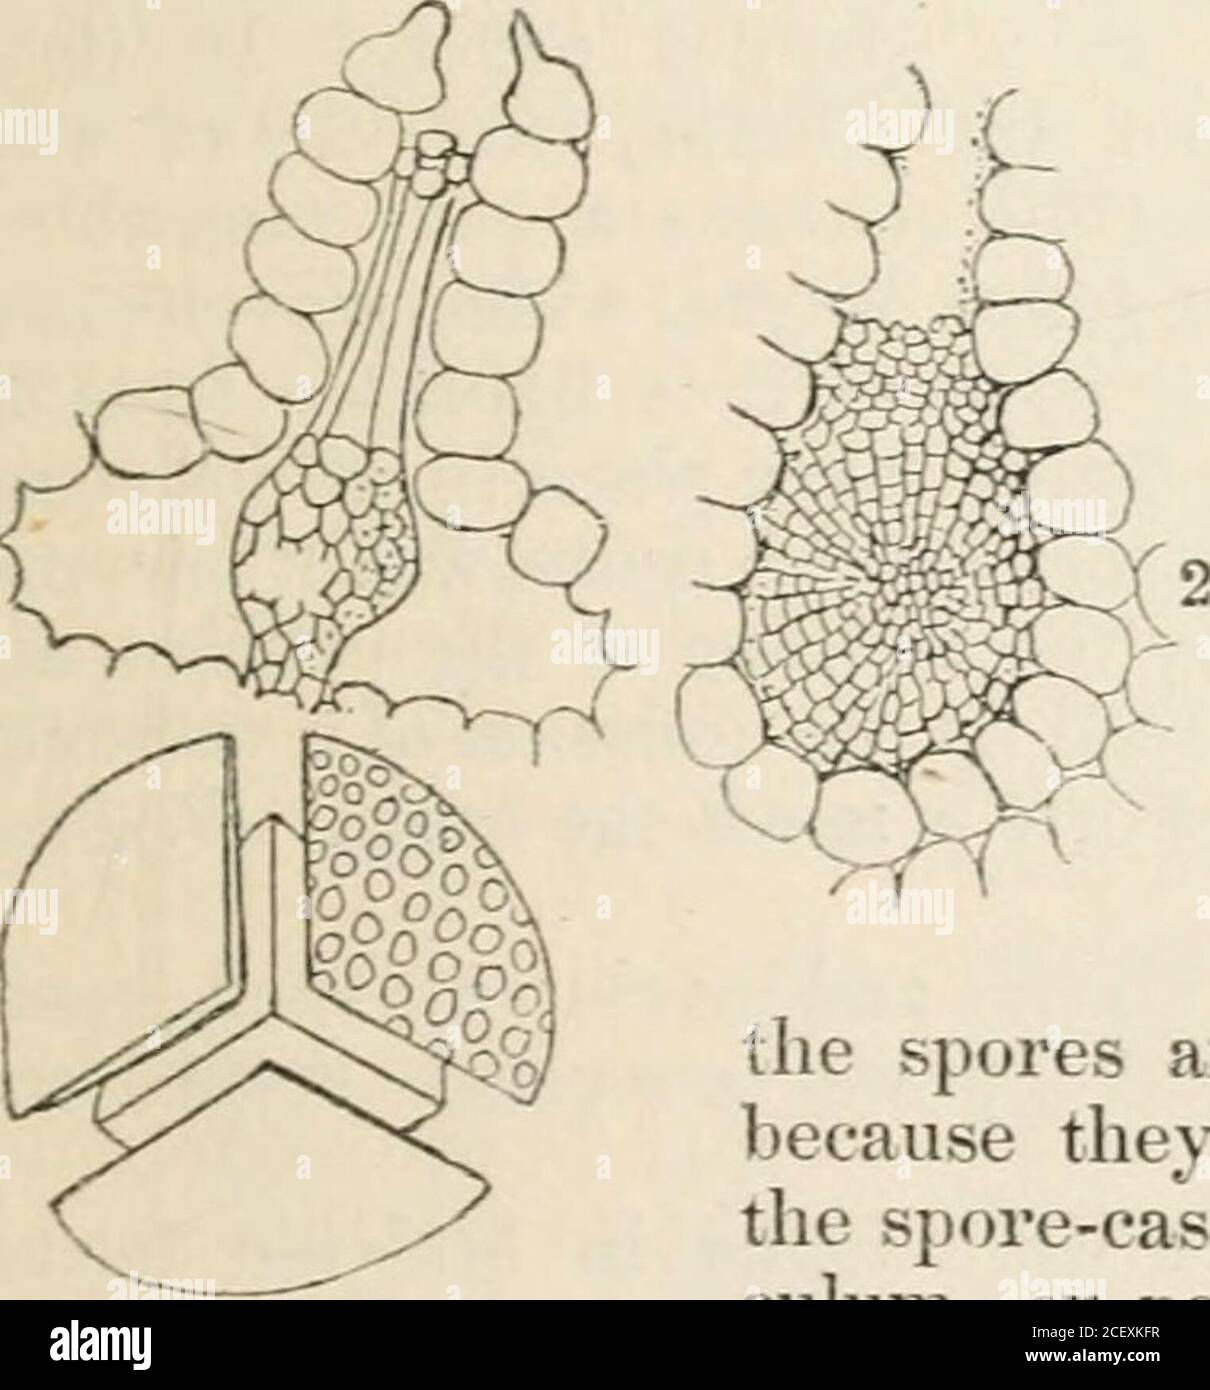 . The vegetable kingdom : or, The structure, classification, and uses of plants, illustrated upon the natural system. w hich, in the latter orders,the spores are dispersed ; and to Split-mosses and Urn mosses,because they want the complicated apparatus which is added tothe spore-cases of those orders, under the form of either an oper-culum, or peristome. According to Endlicher, the Crystahvortspass through Corsmia into the tribe of Liverworts, and l)y Sphsero-carpus into that of Scalemosses. There is a detailed account, byUuger, of the anatomy of Riccia glauca, in the Lmnoeo, vol. xiii. p. 1. Stock Photo